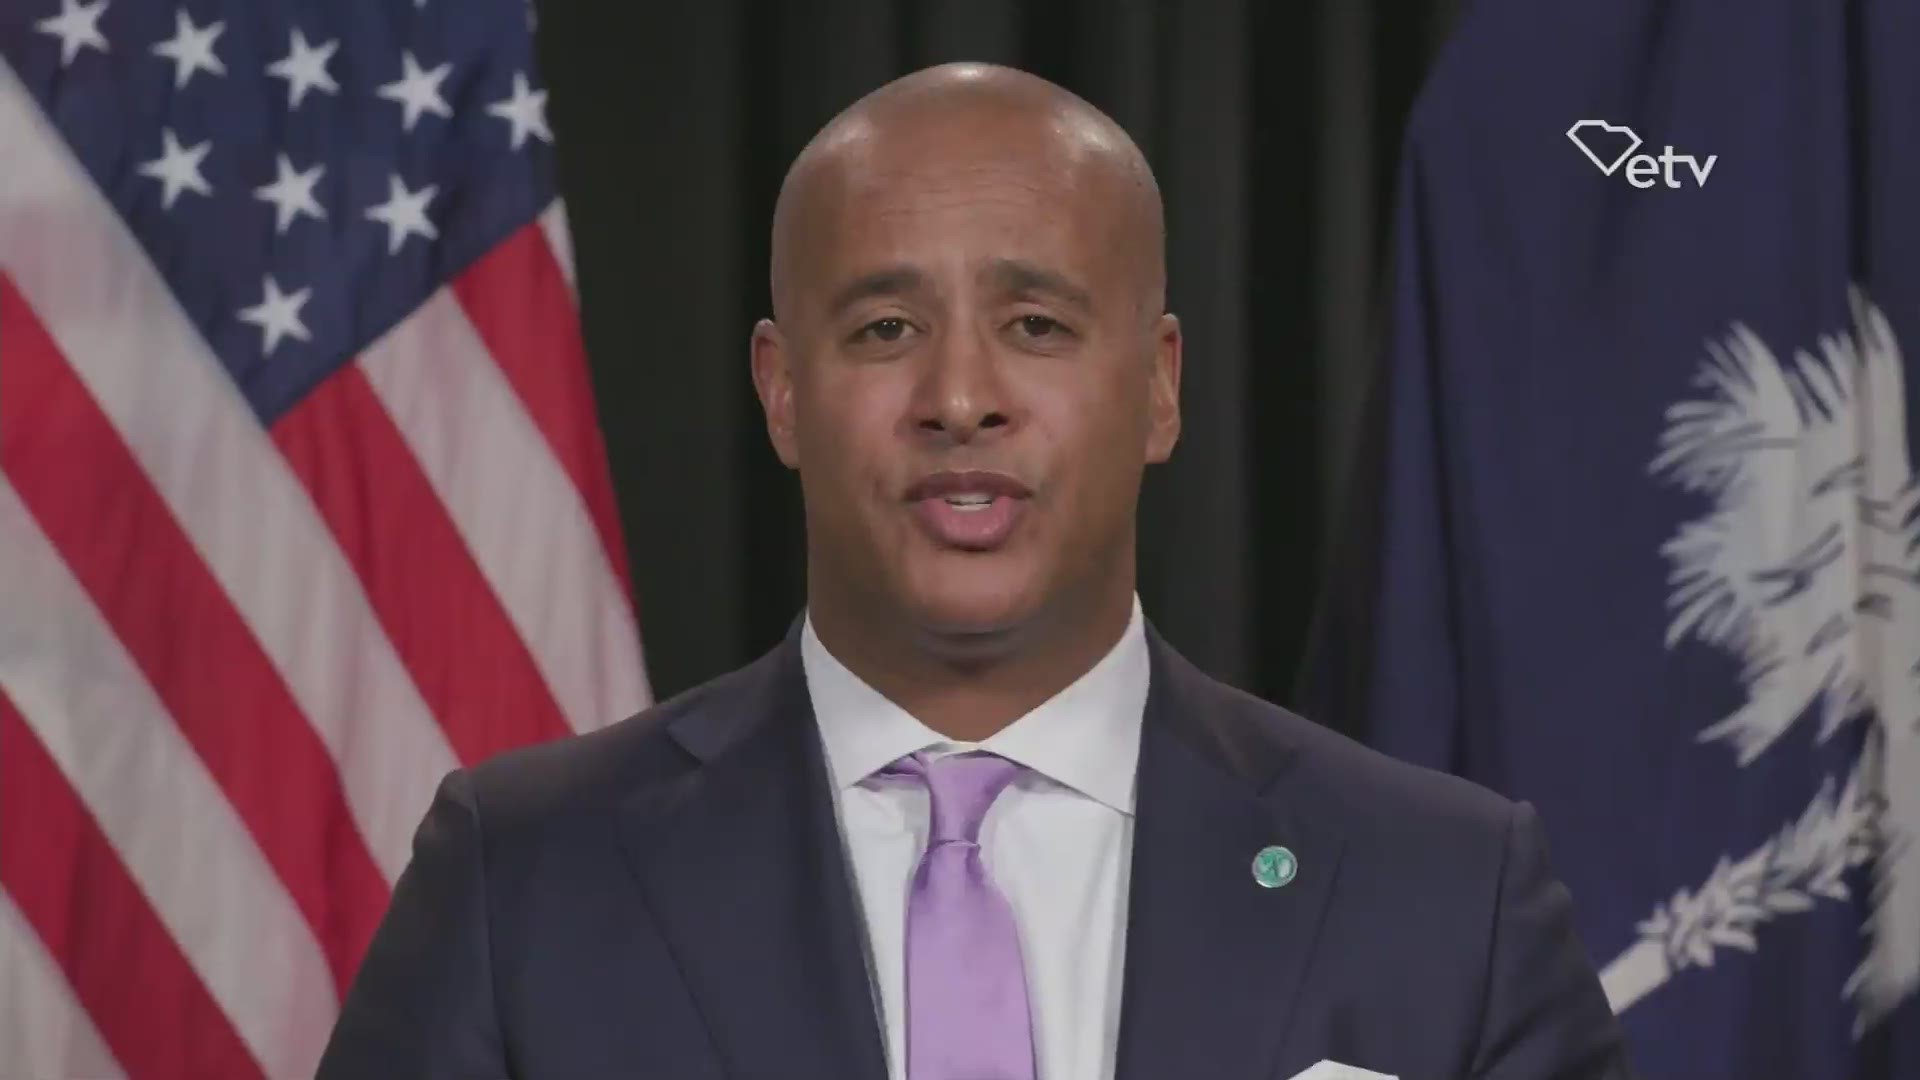 Rep. Todd Rutherford gave the Democratic response to Gov. Henry McMaster's 2020 State of the State address.